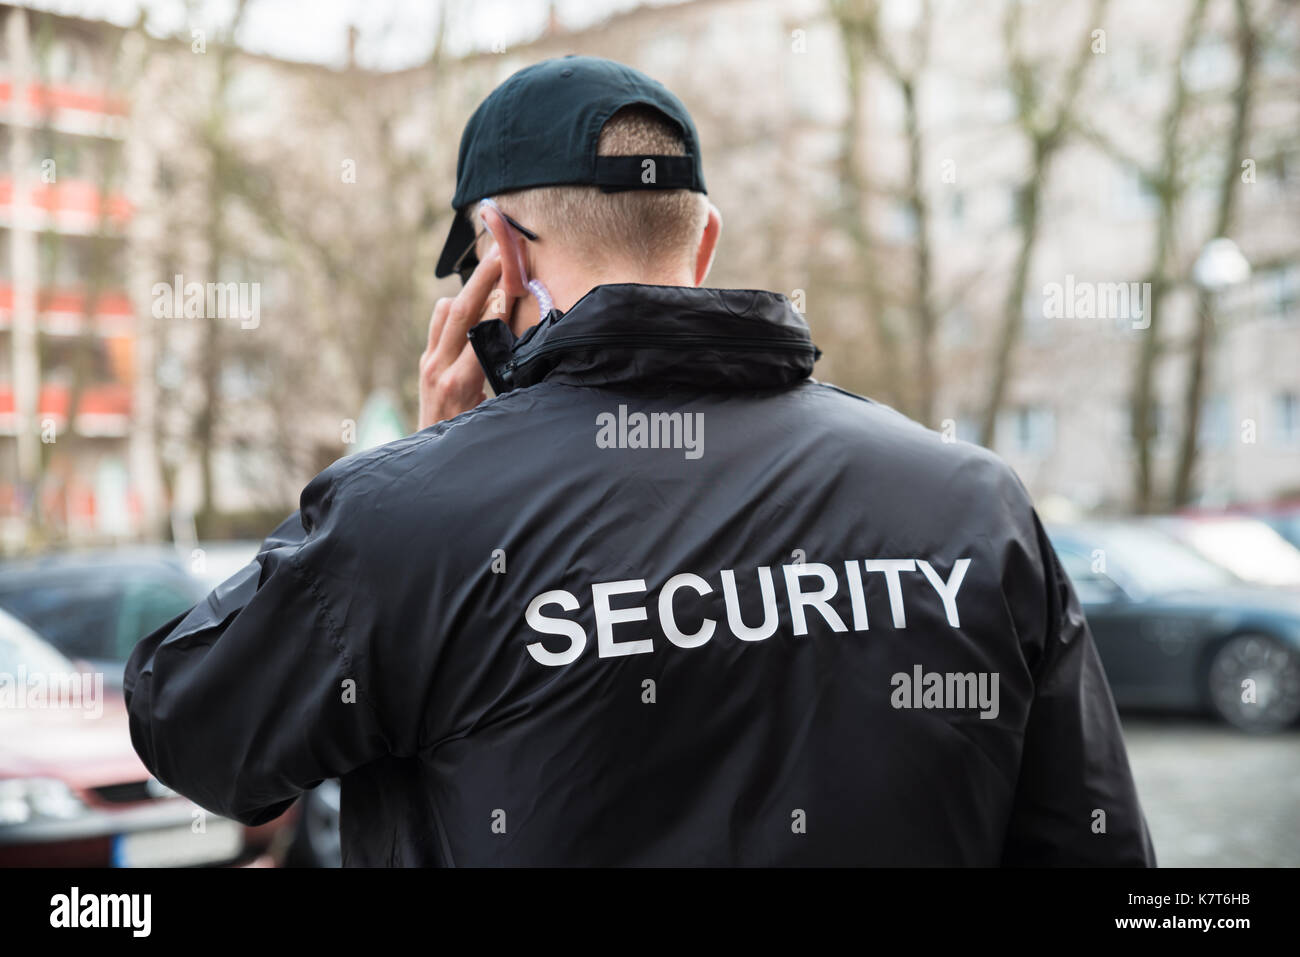 Security Guard In Black Uniform Listening With Earpiece Stock Photo